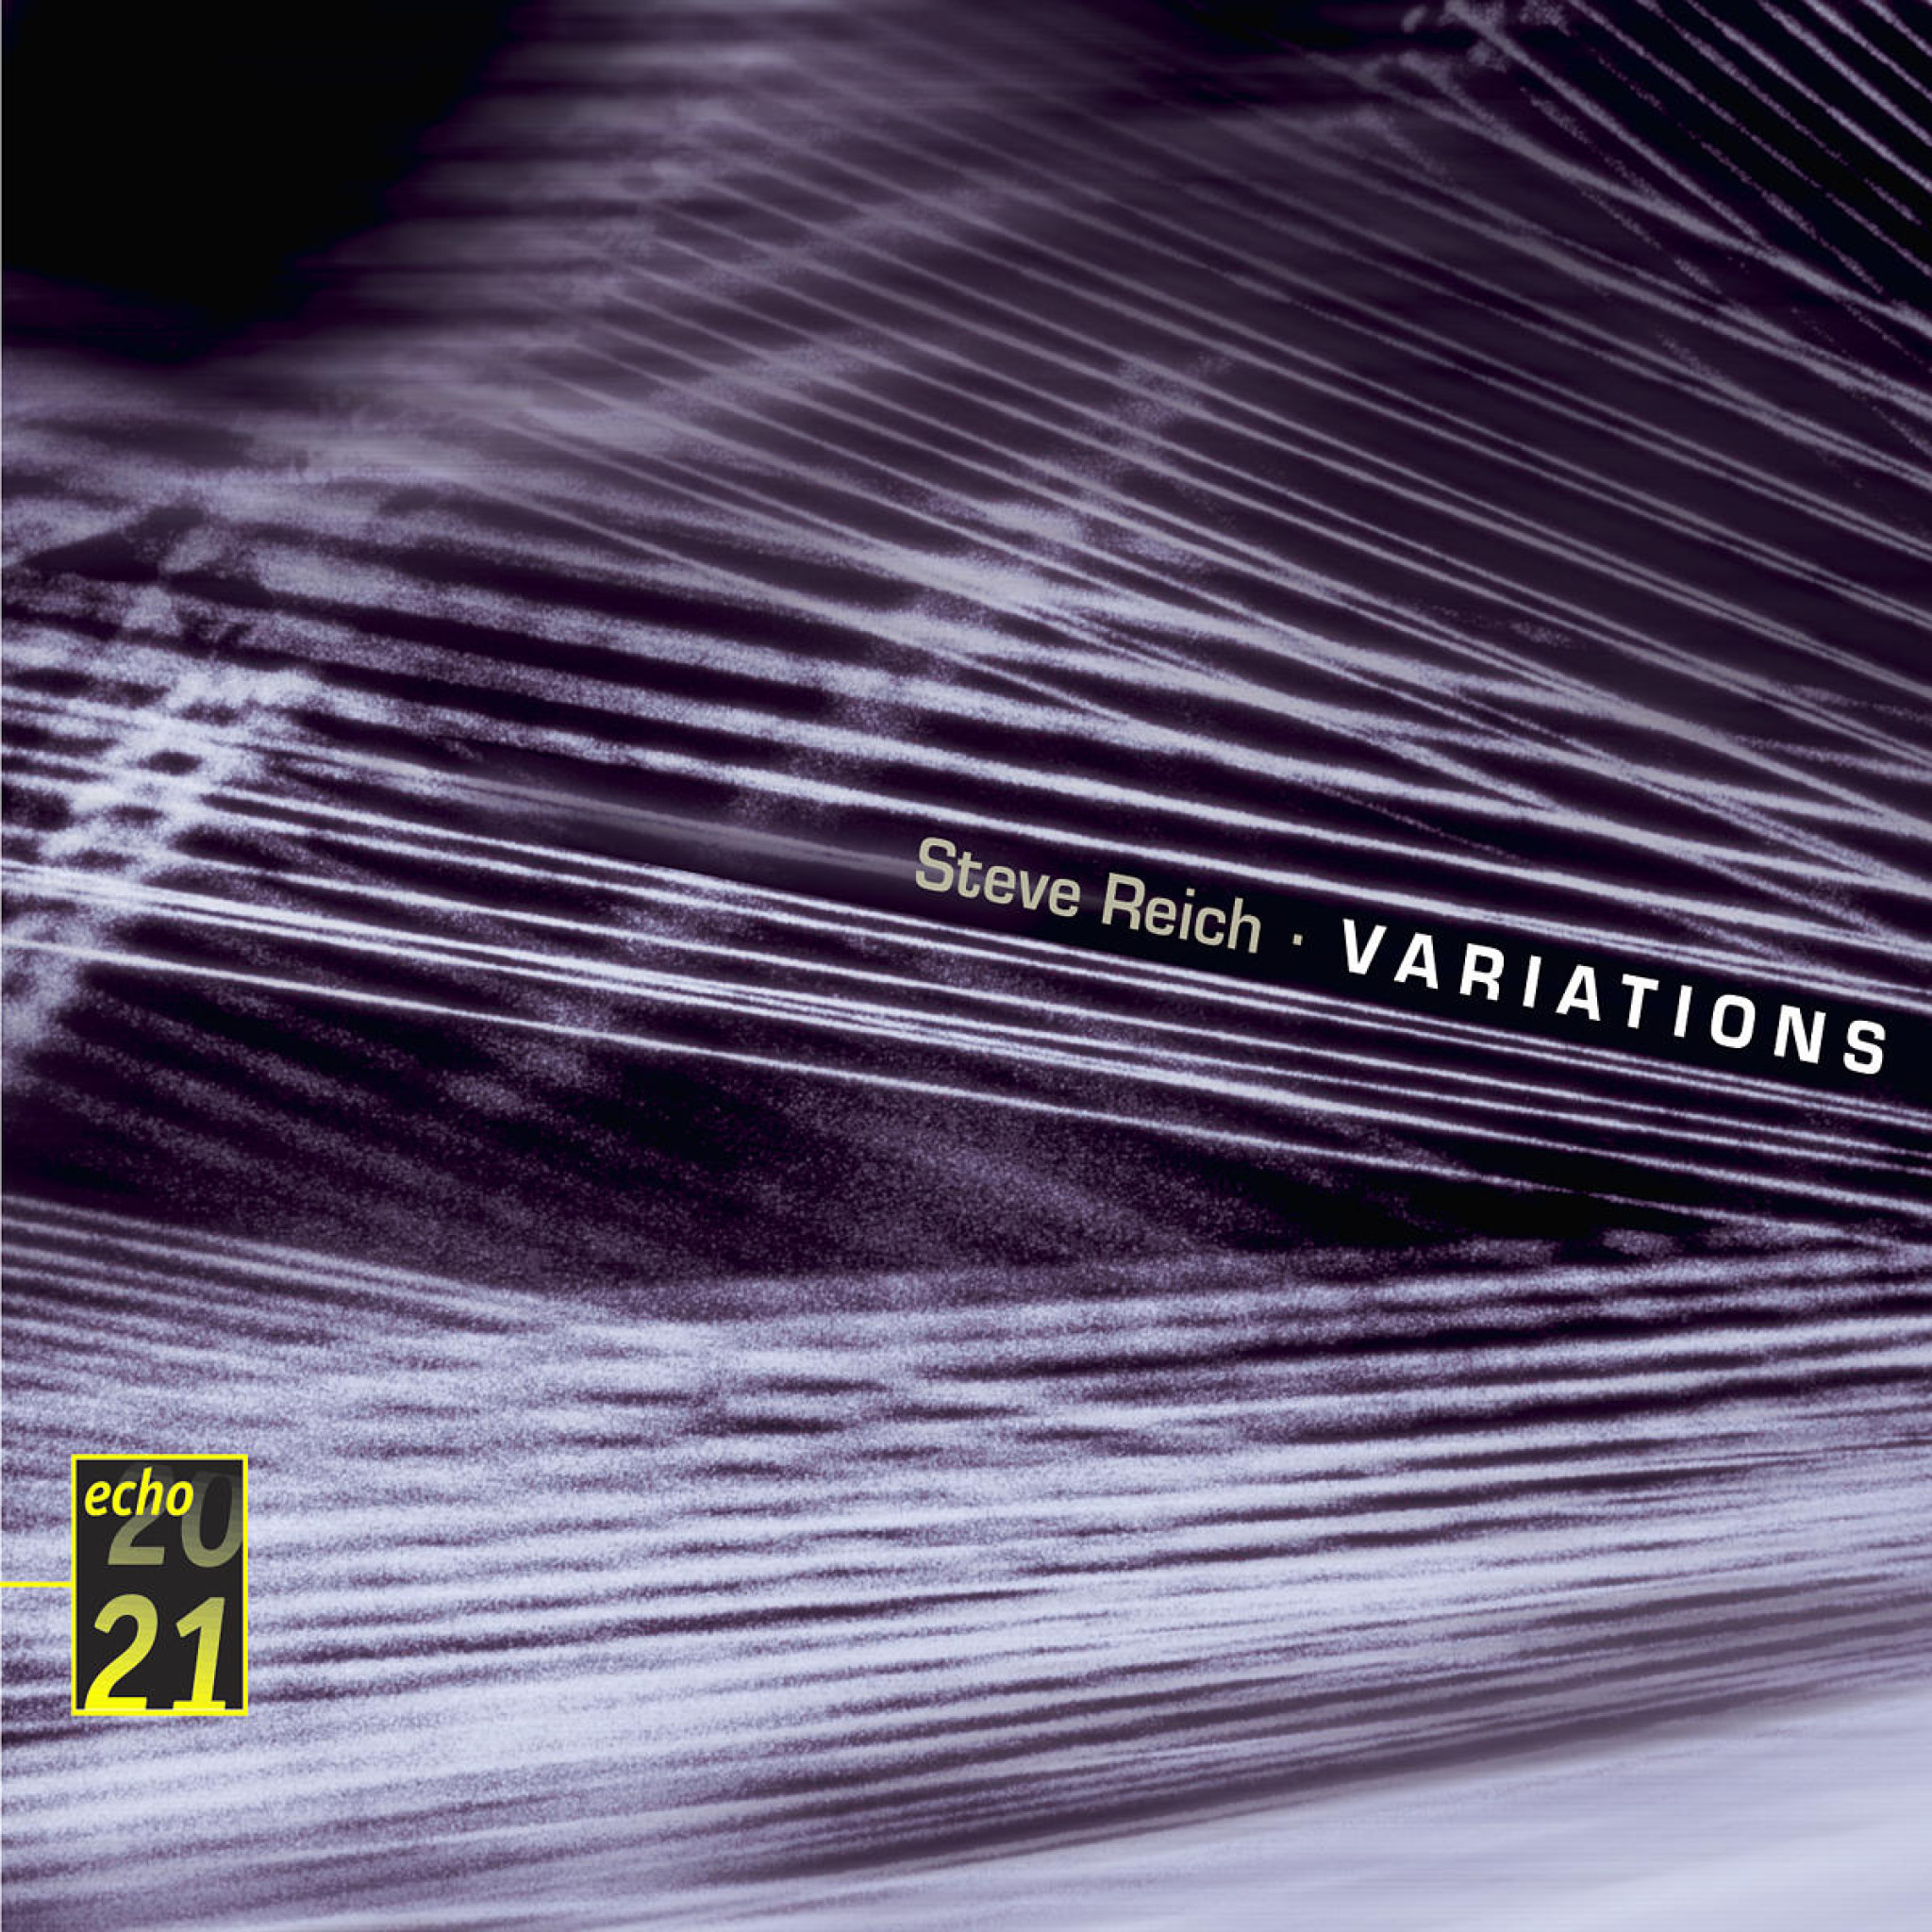 Variations for Winds, Strings and Keyboard; Music for Mallet Instruments; Six Pianos 0028947159126